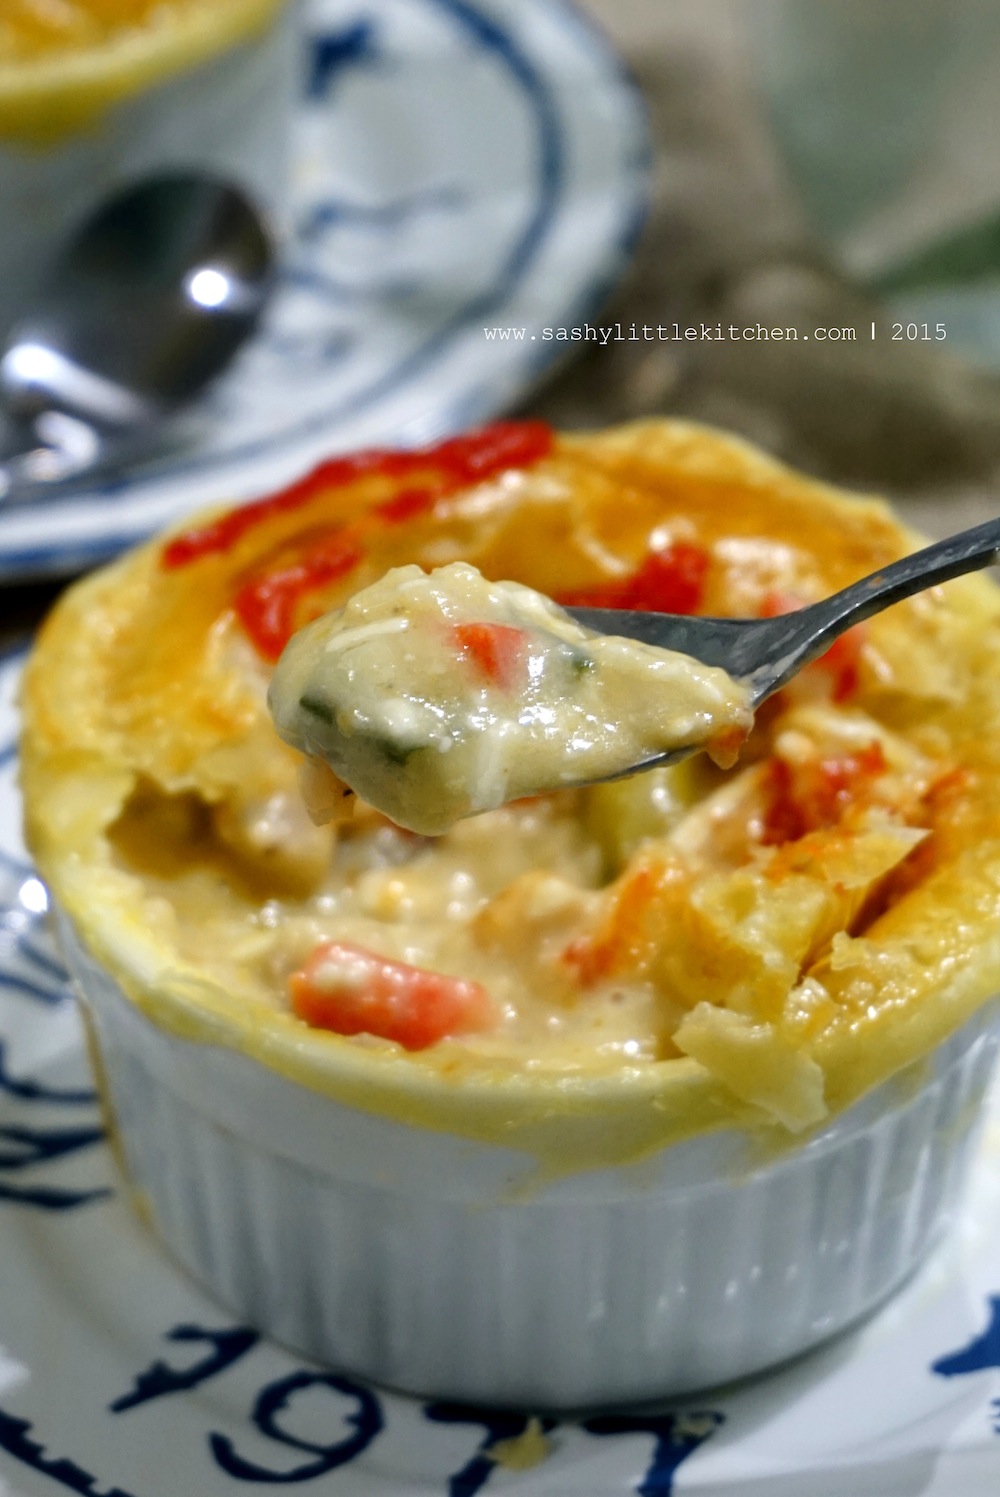 Resep Zuppa Soup ( Pastry isi Krim Sup) - Bali Food 